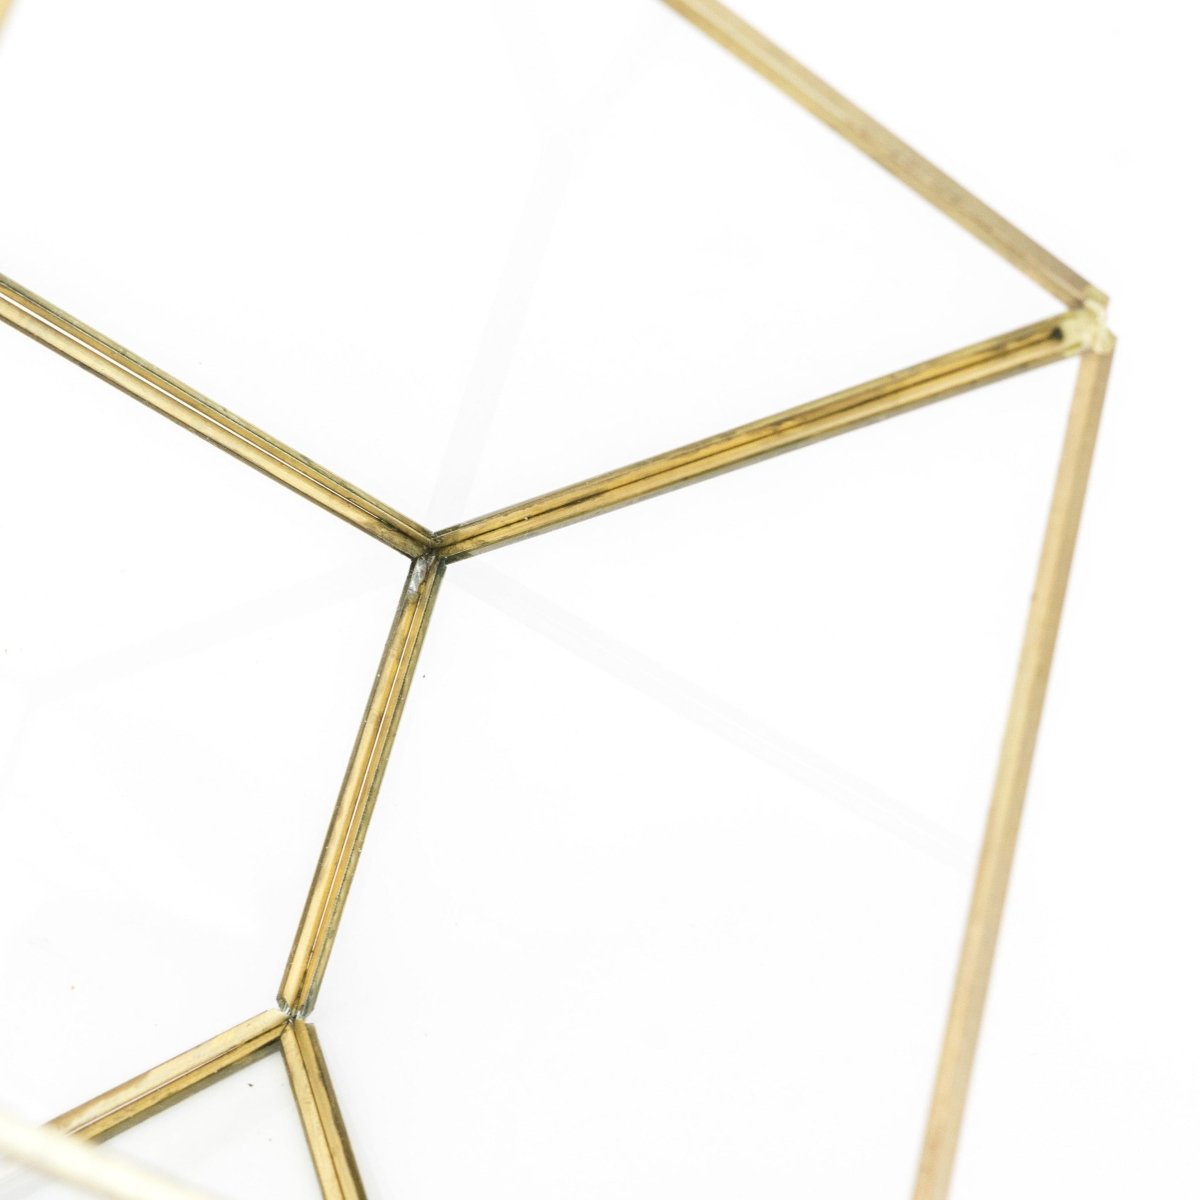 Air Plant Supply Co. Heptahedron Geometric Glass Terrarium with Gold Metallic Finish for Air Plants - lily & onyx